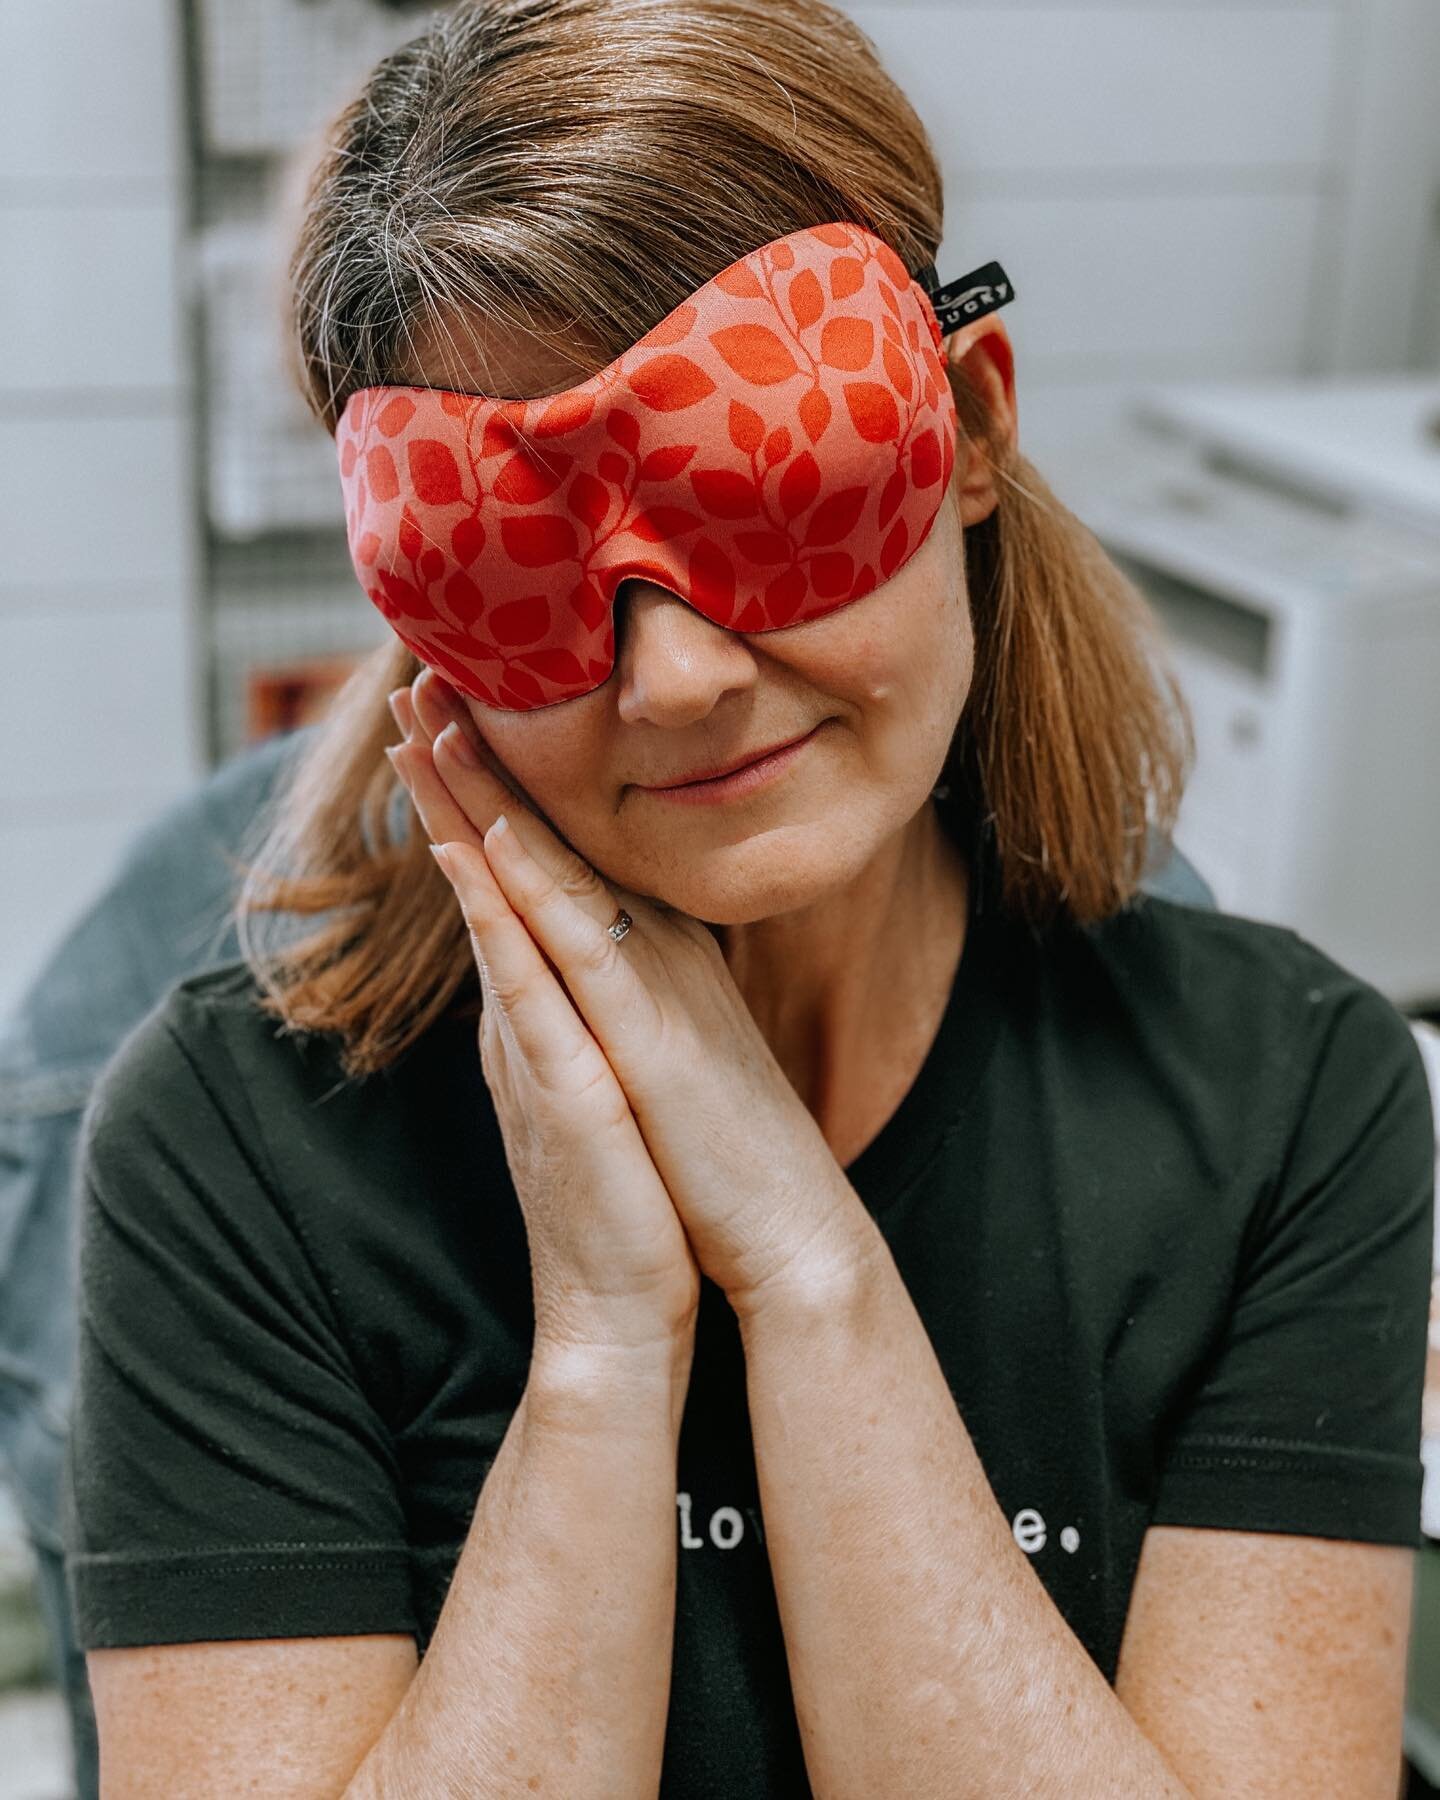 Sleep mask or bra? We&rsquo;ll let you be the judge! Swipe through ⬅️ 

#junipertreemarket